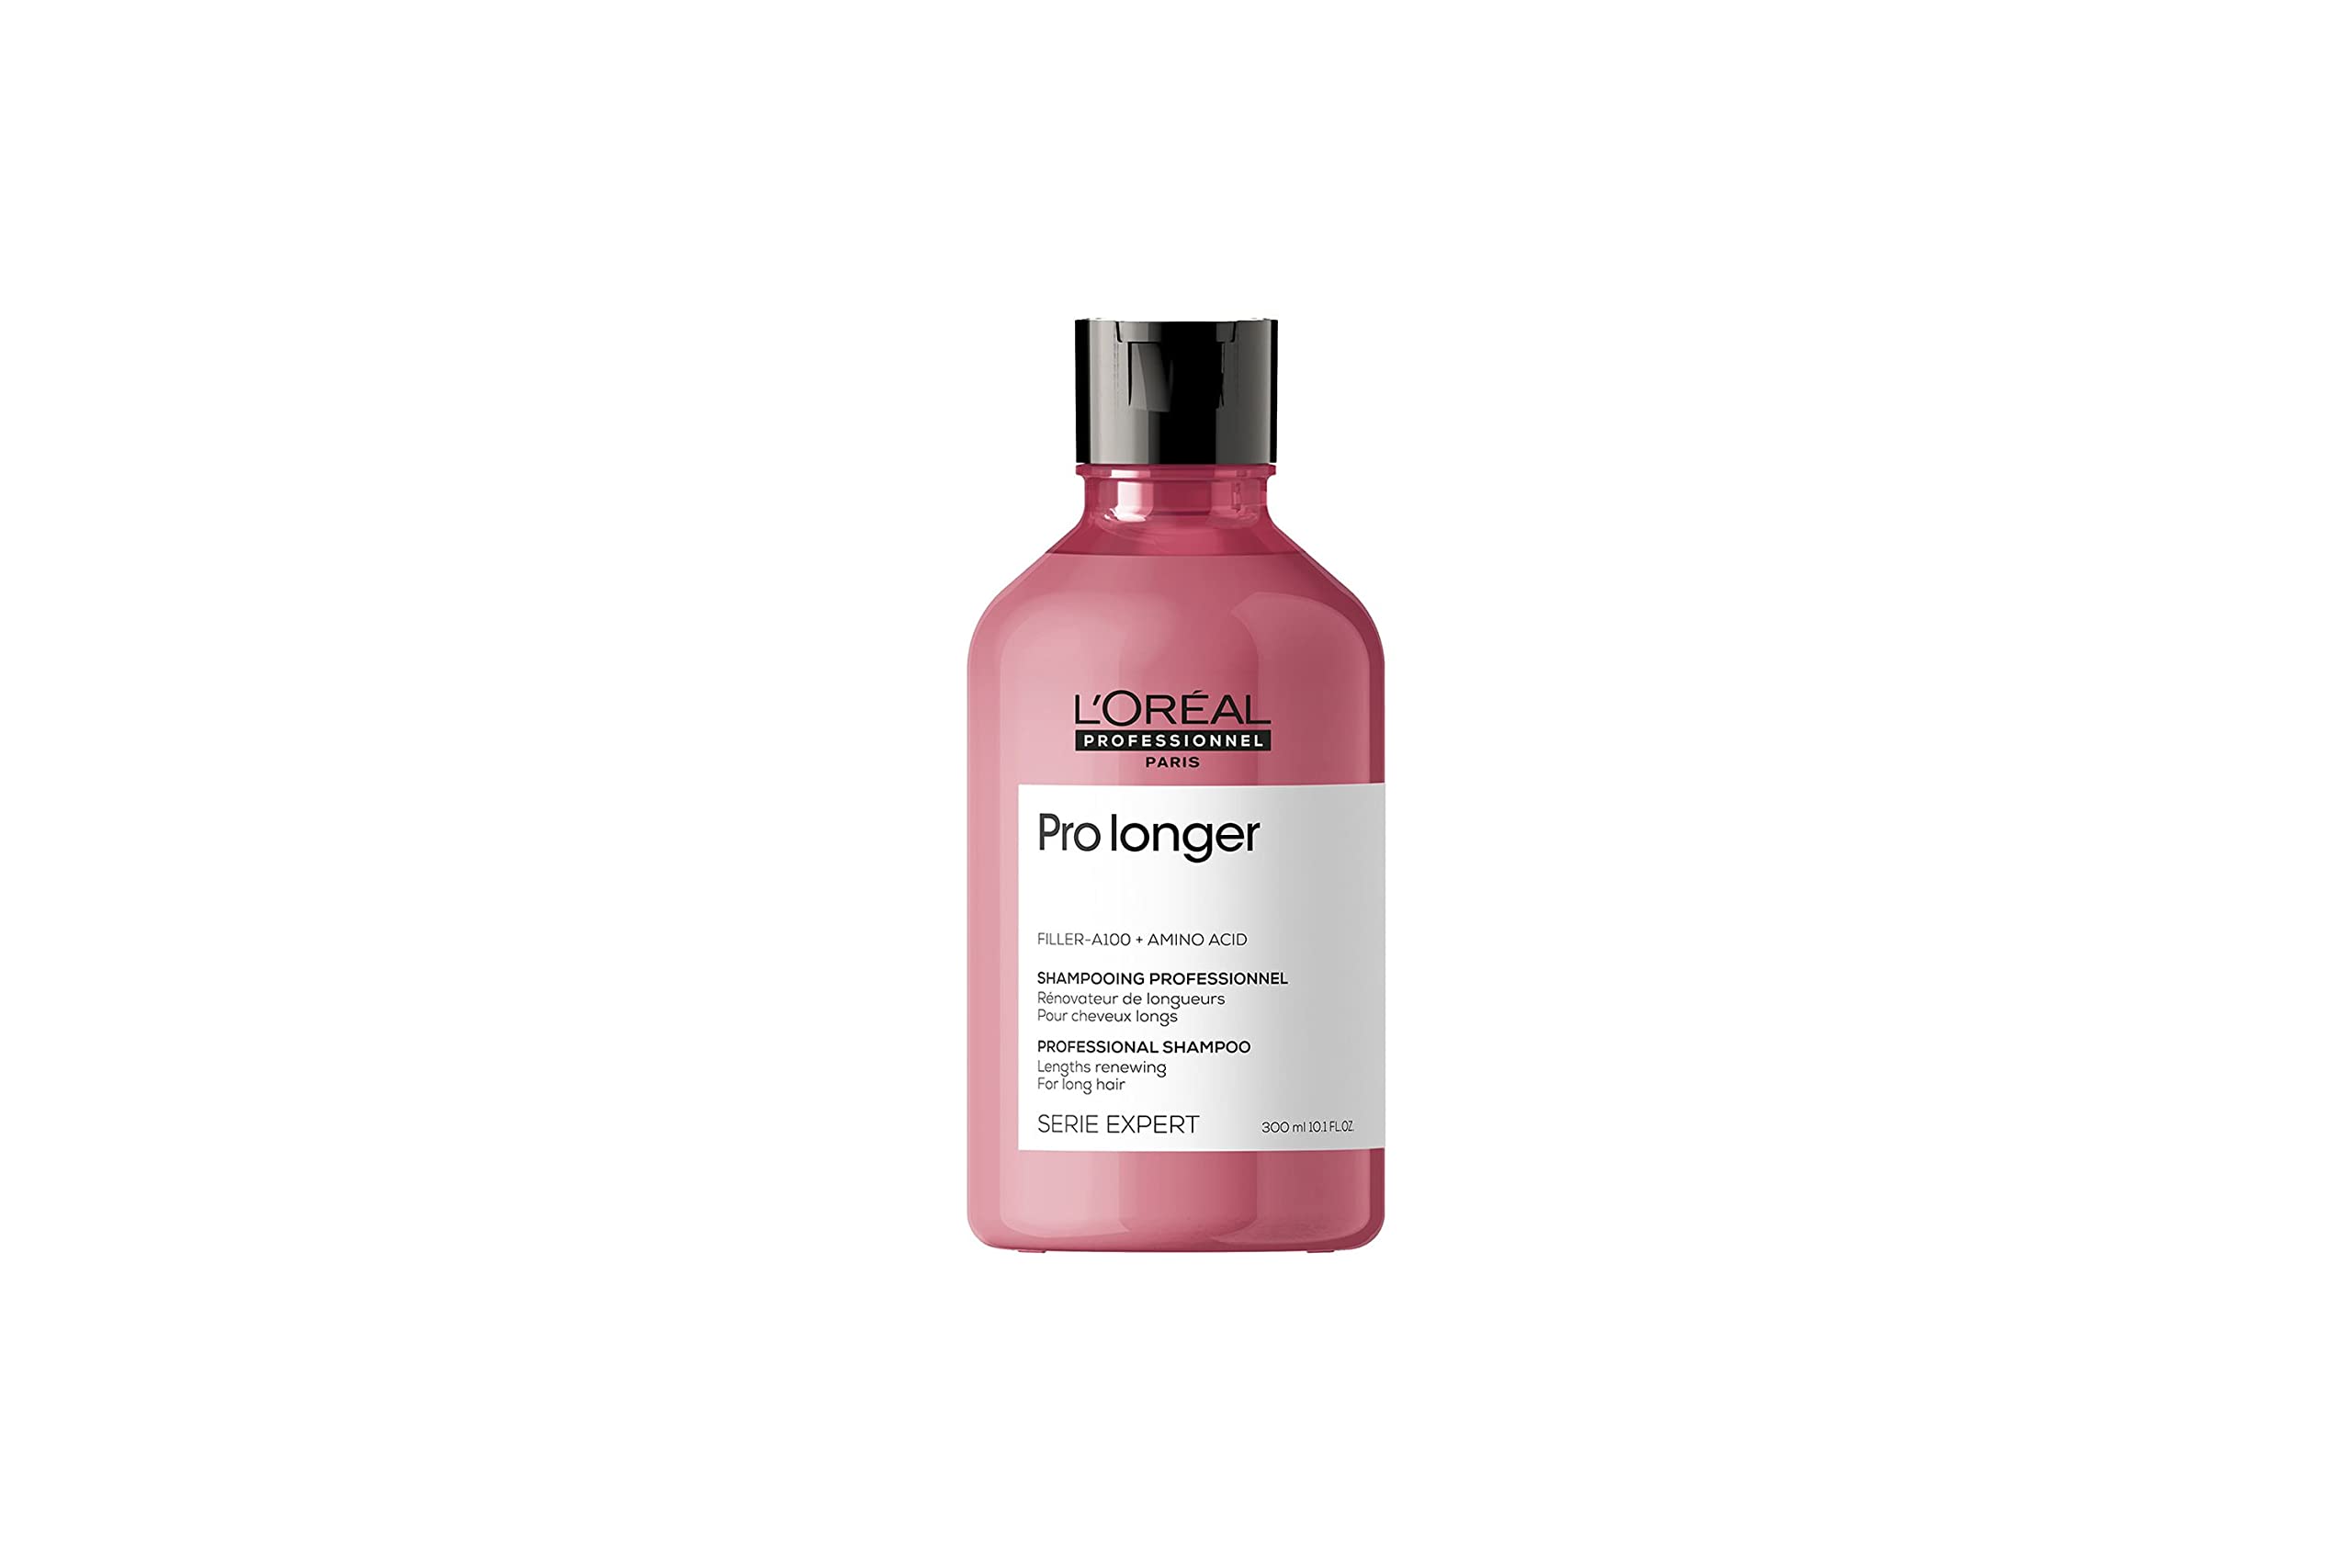 L’Oréal Professionnel | Shampoo, With Filler-A100 And Amino Acid for Long Hair With Thin Ends, Serie Expert Pro Longer, 300 ml